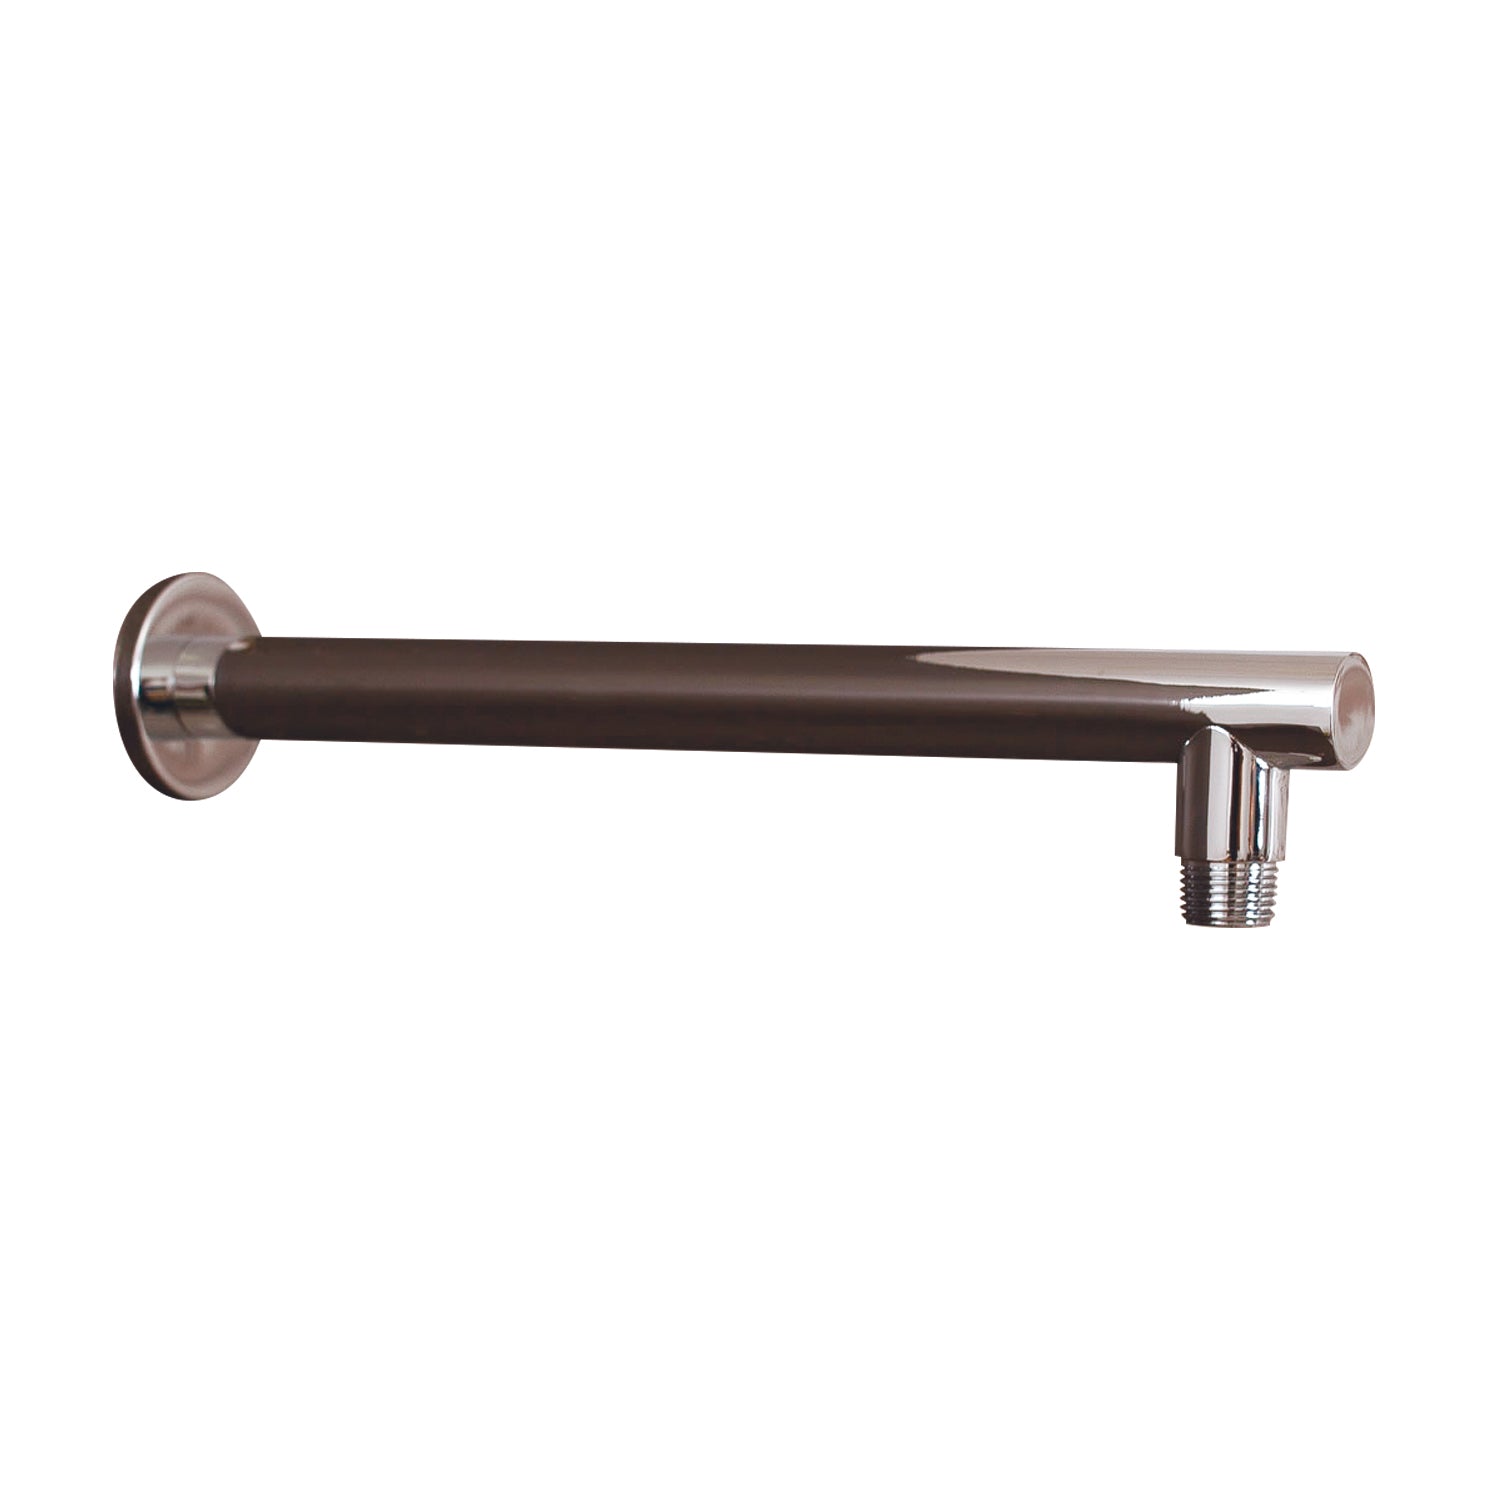 DAX Round Shower Arm, Spout, Brass Body, Wall Mount, Chrome Finish, 12 Inches (D-F04-12-CR)